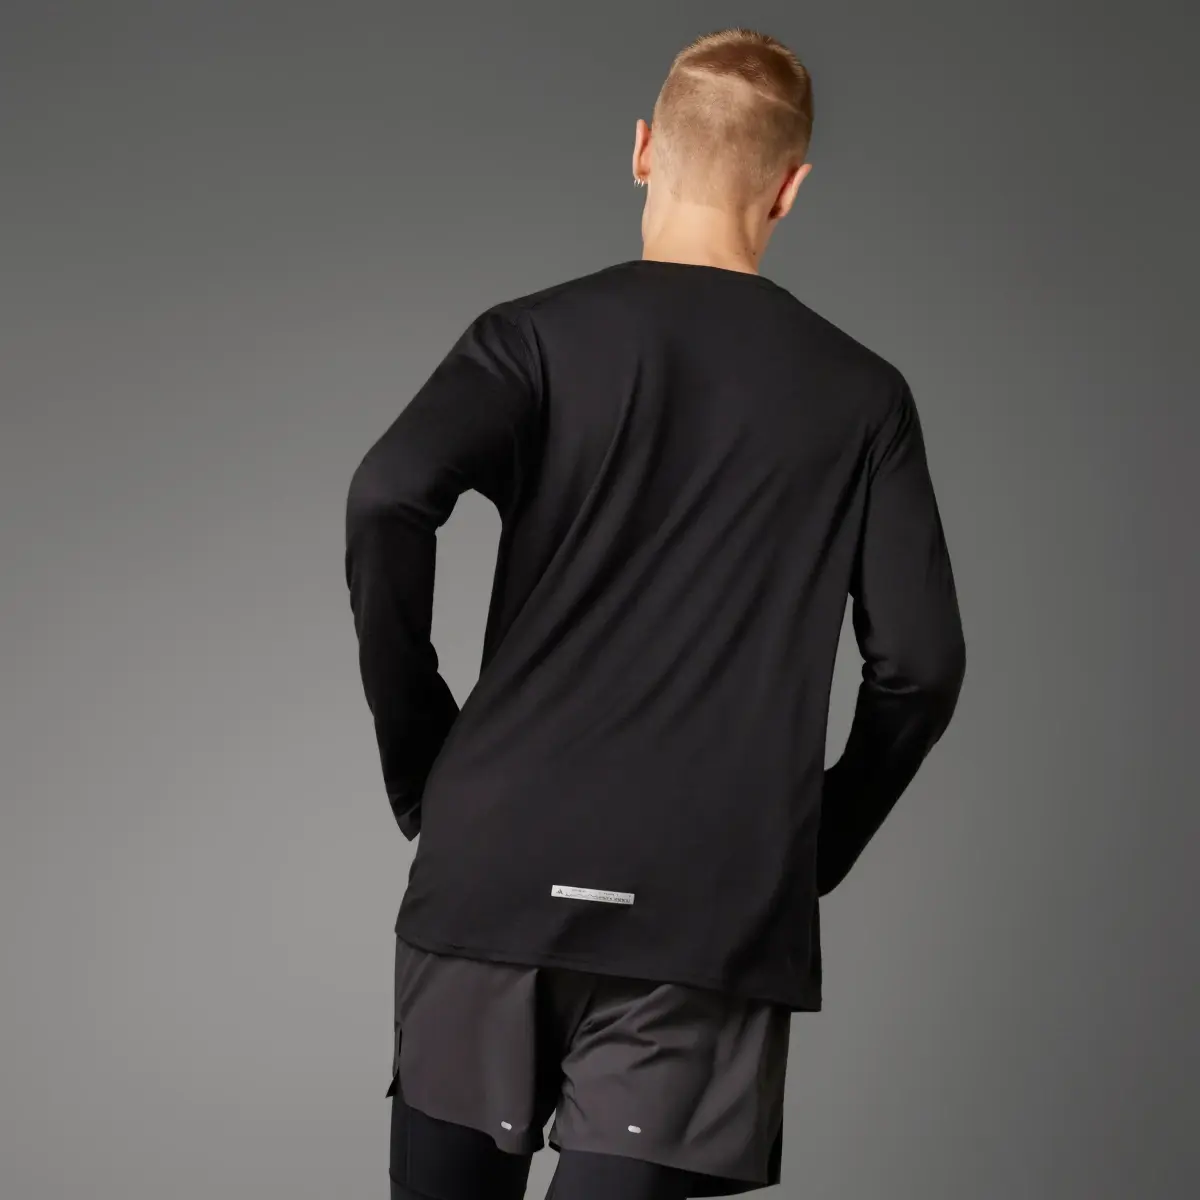 Adidas Ultimate Running Conquer the Elements Merino Long Sleeve Shirt. 2